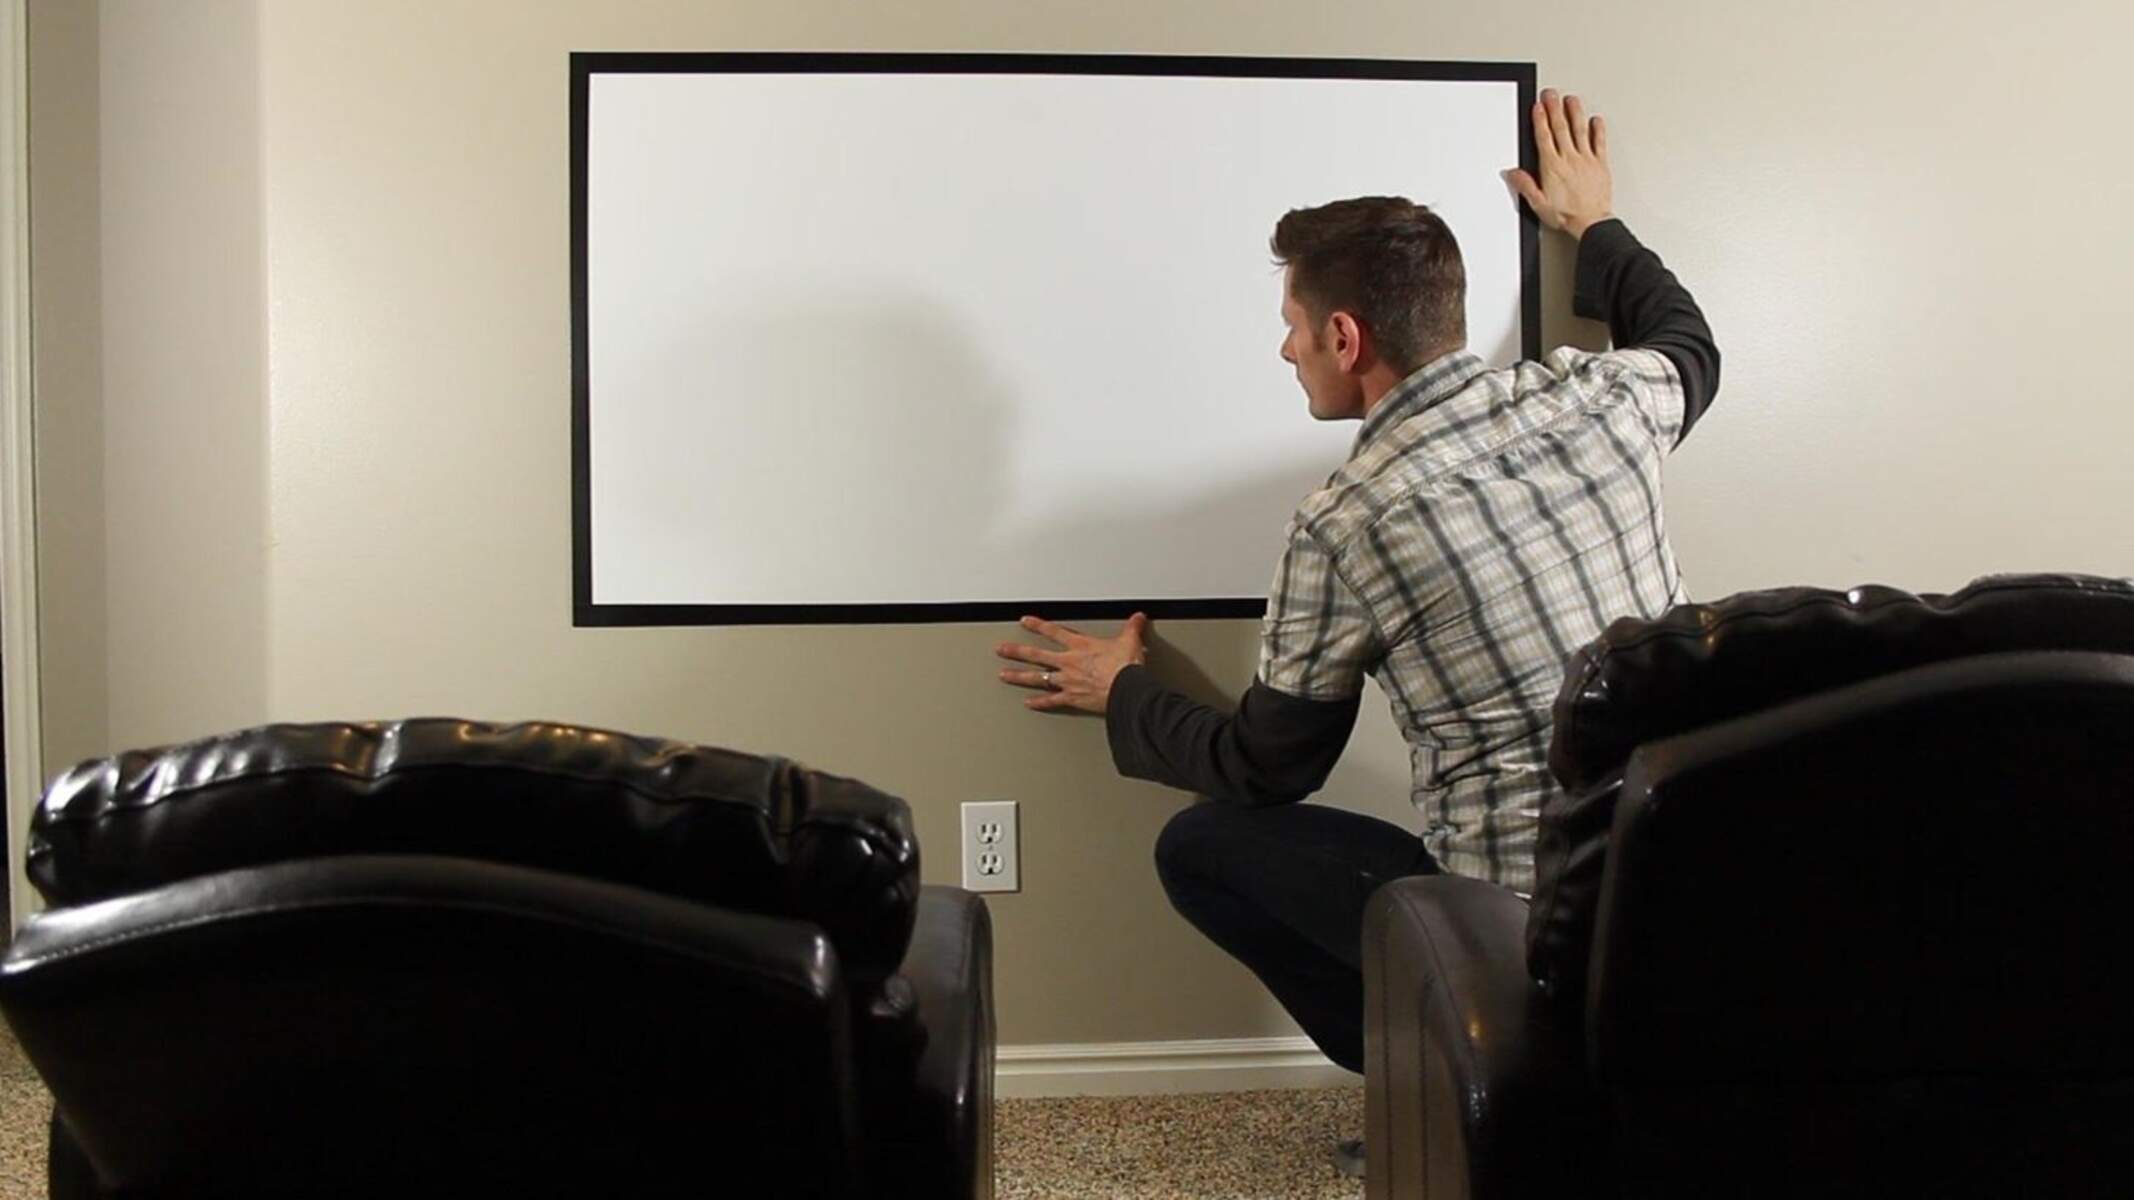 How To Make A Projector Screen